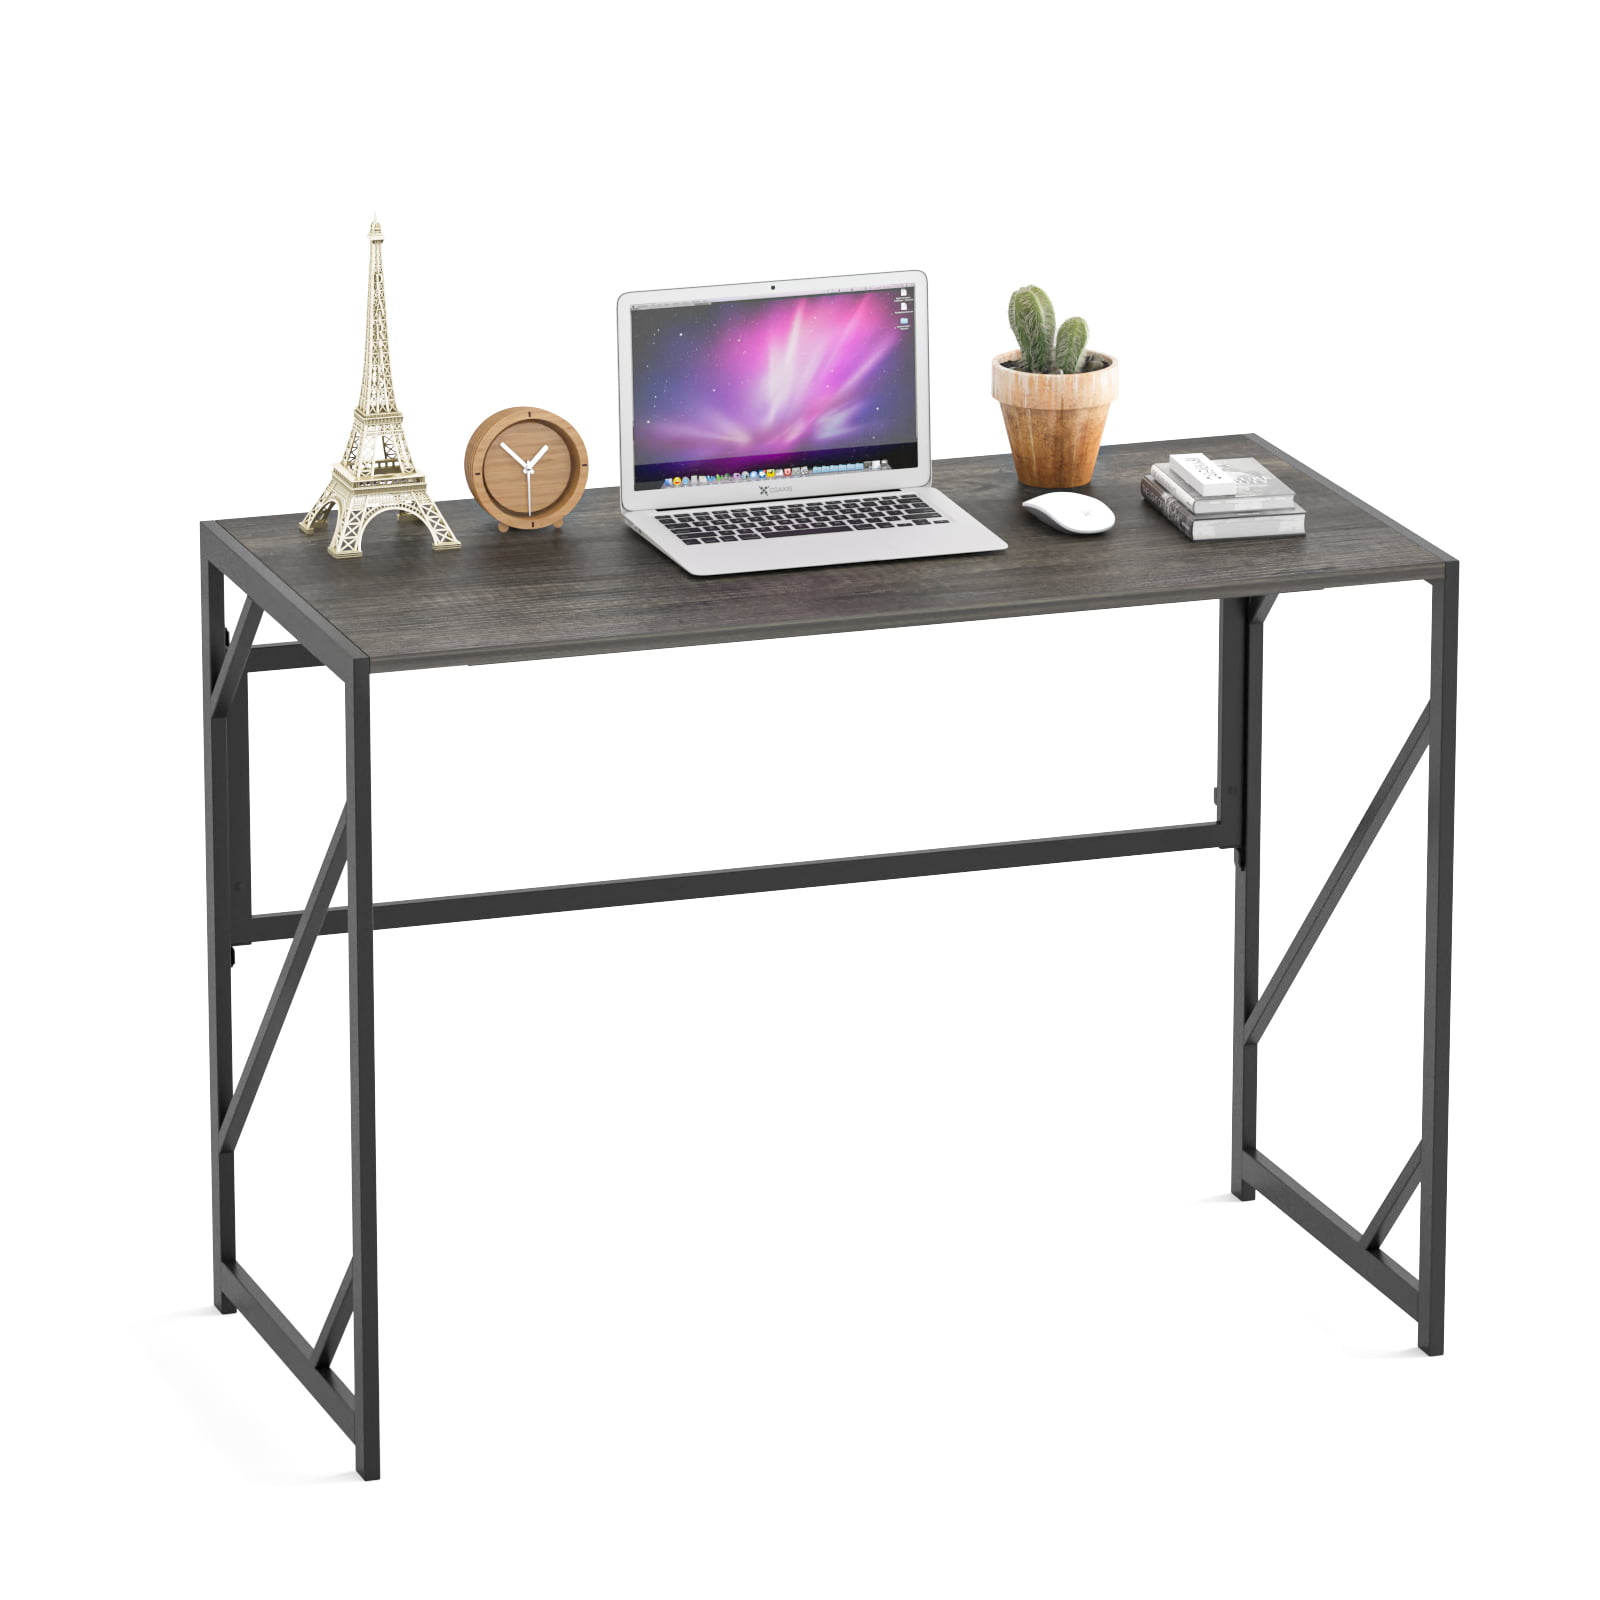 Folding Computer Desk Home Office Laptop Table Wooden Study Writing Workstation 